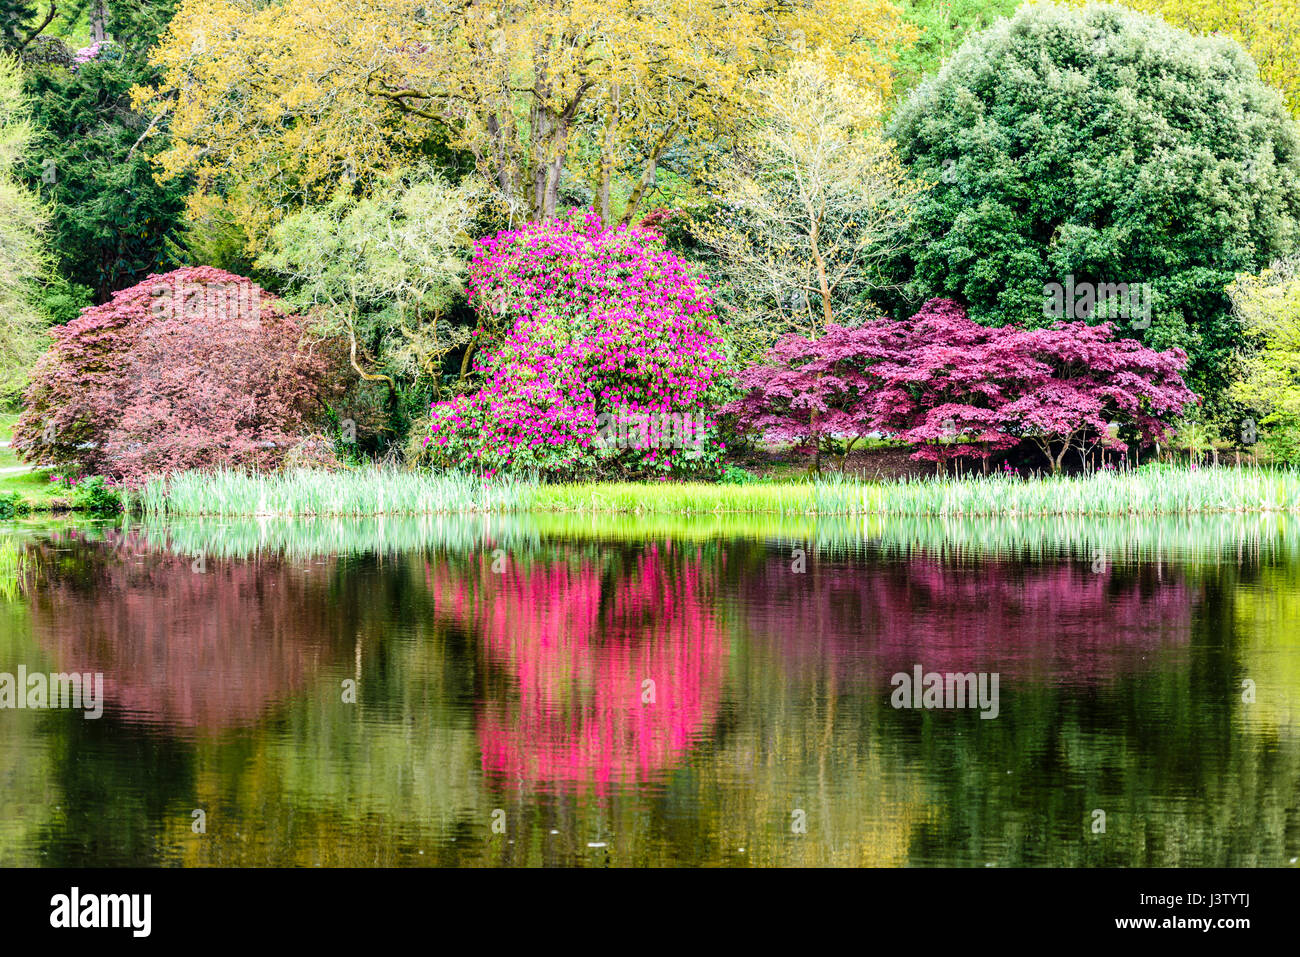 Pink rhododendron and purple Japanese acers reflected in the surface of a large lake in a beautiful garden Stock Photo